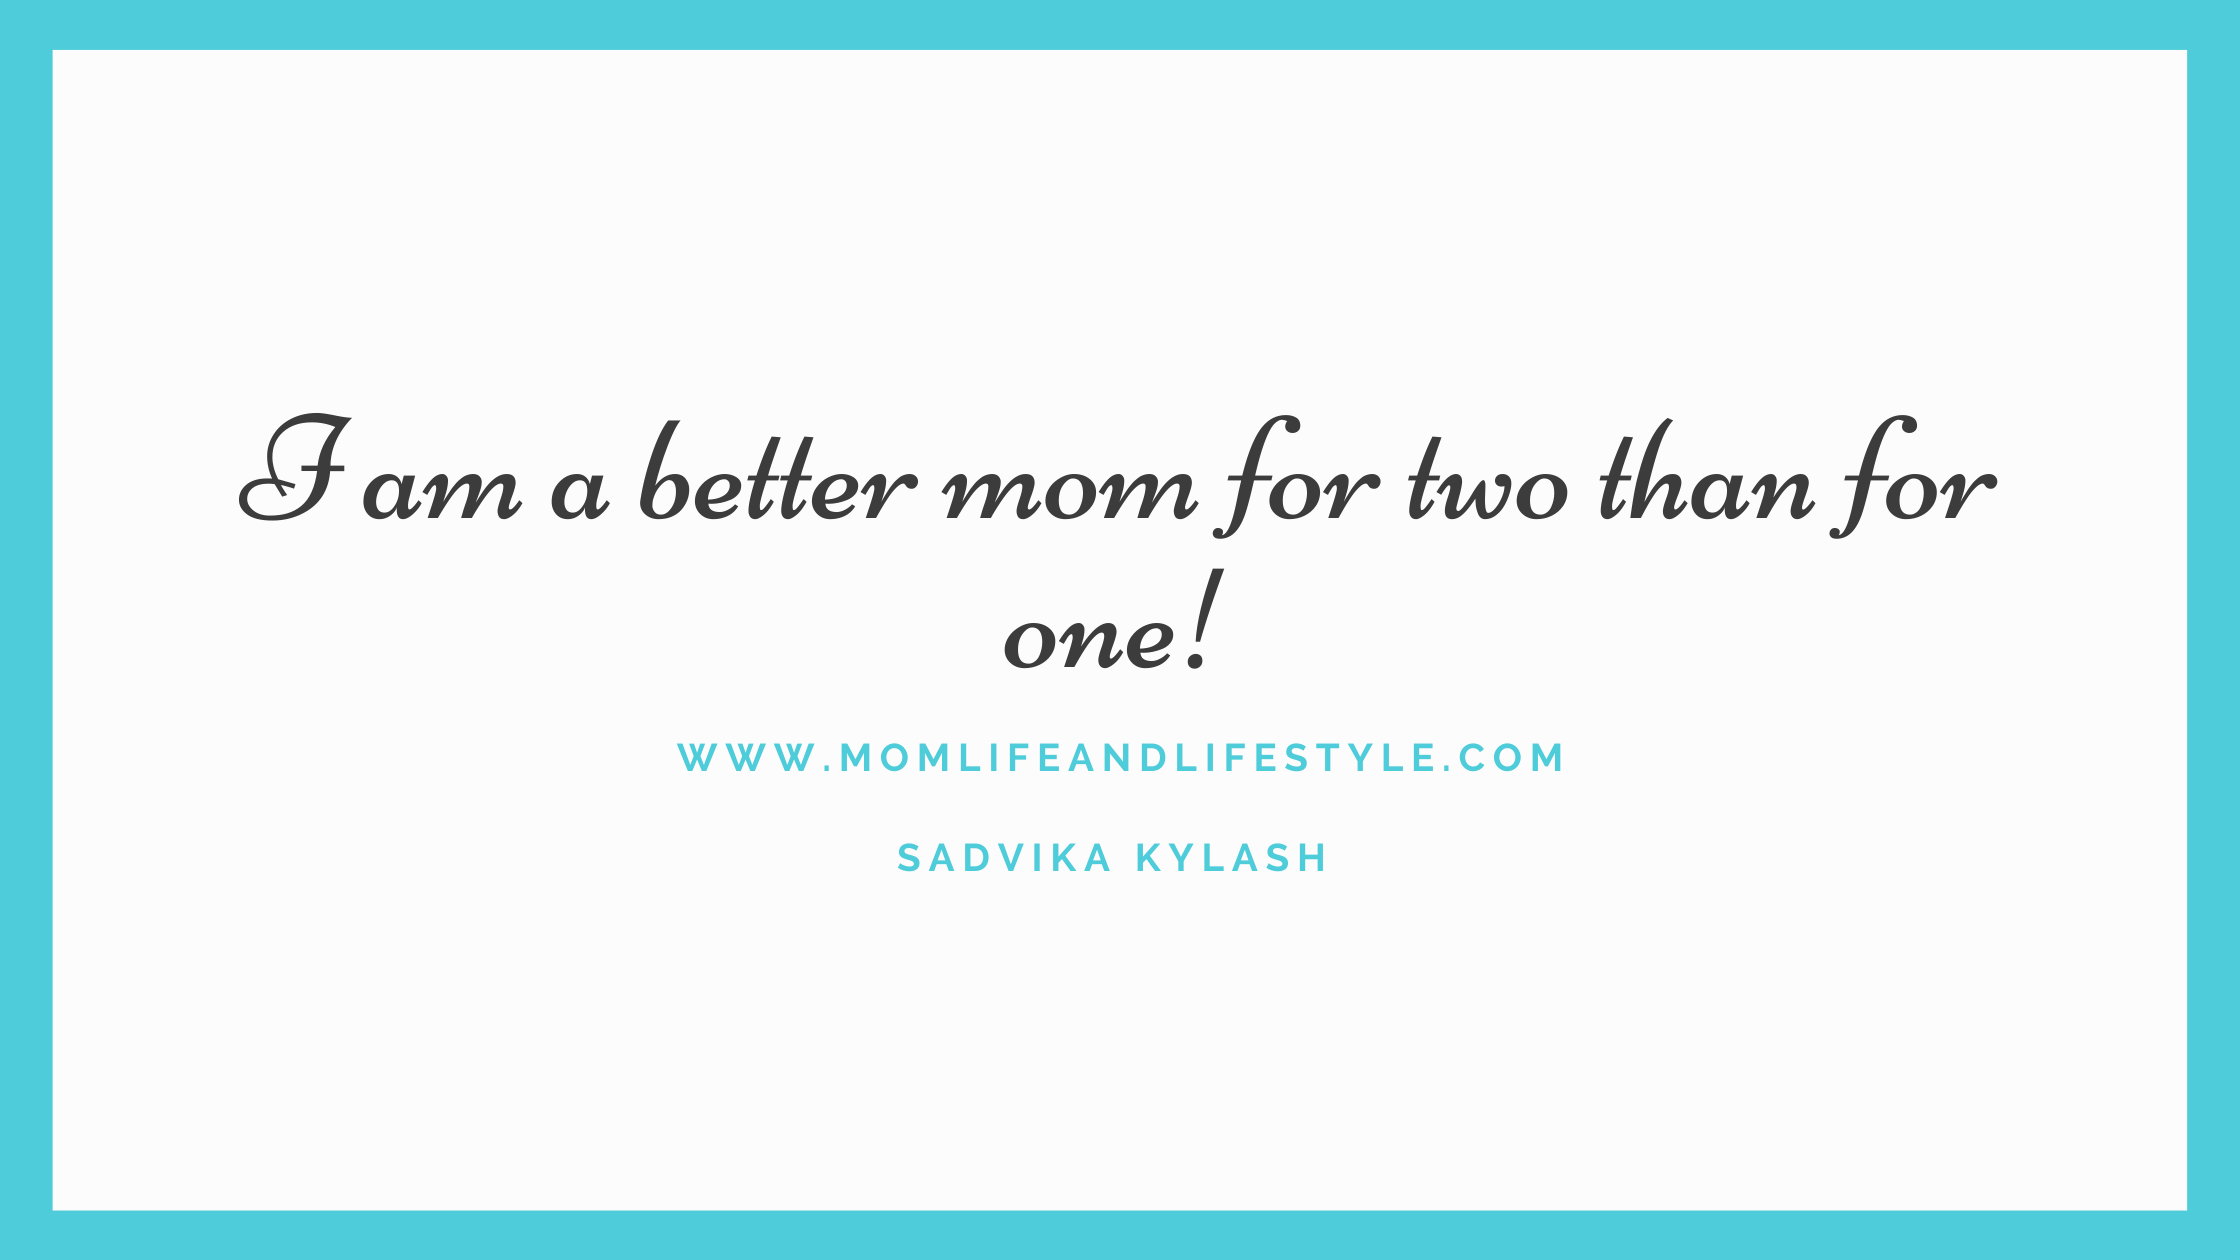 I am a better mom for two than for one!